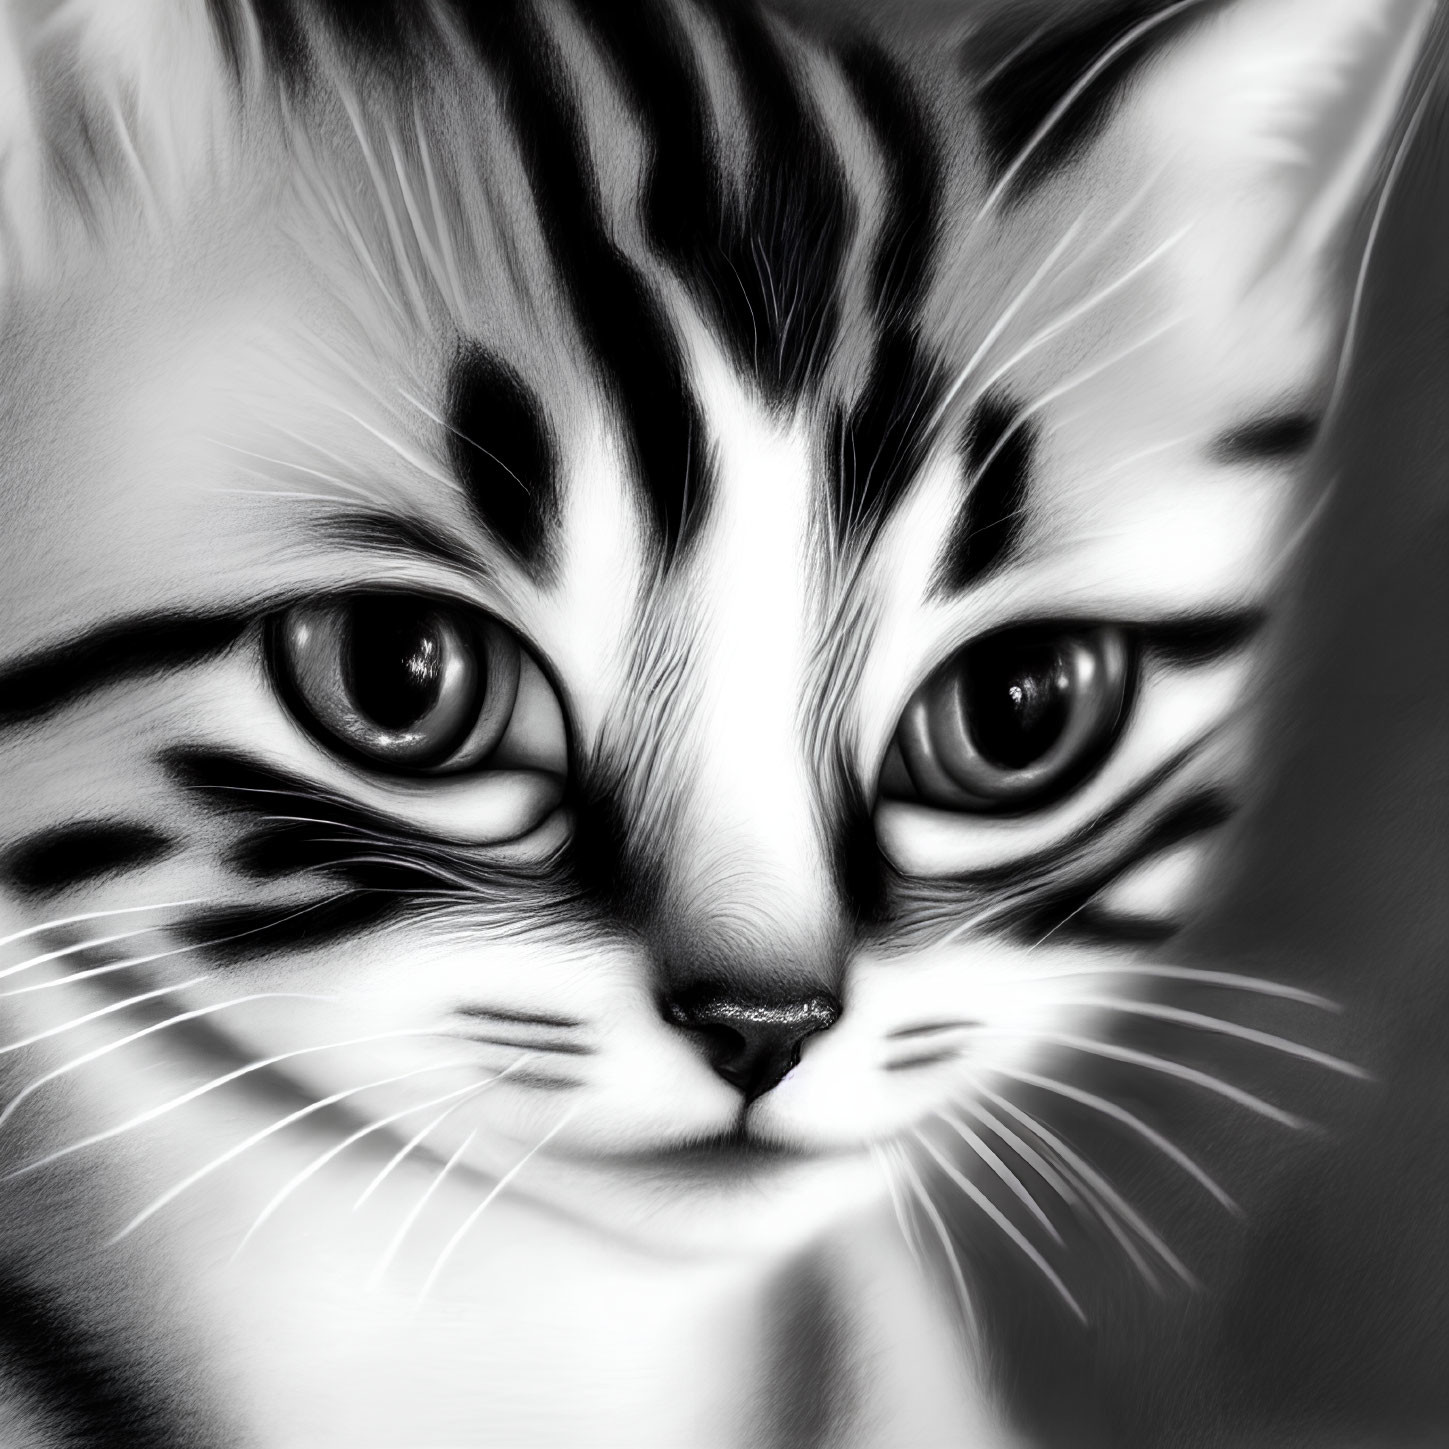 Monochrome digital artwork of a kitten's face with prominent eyes and striped fur.